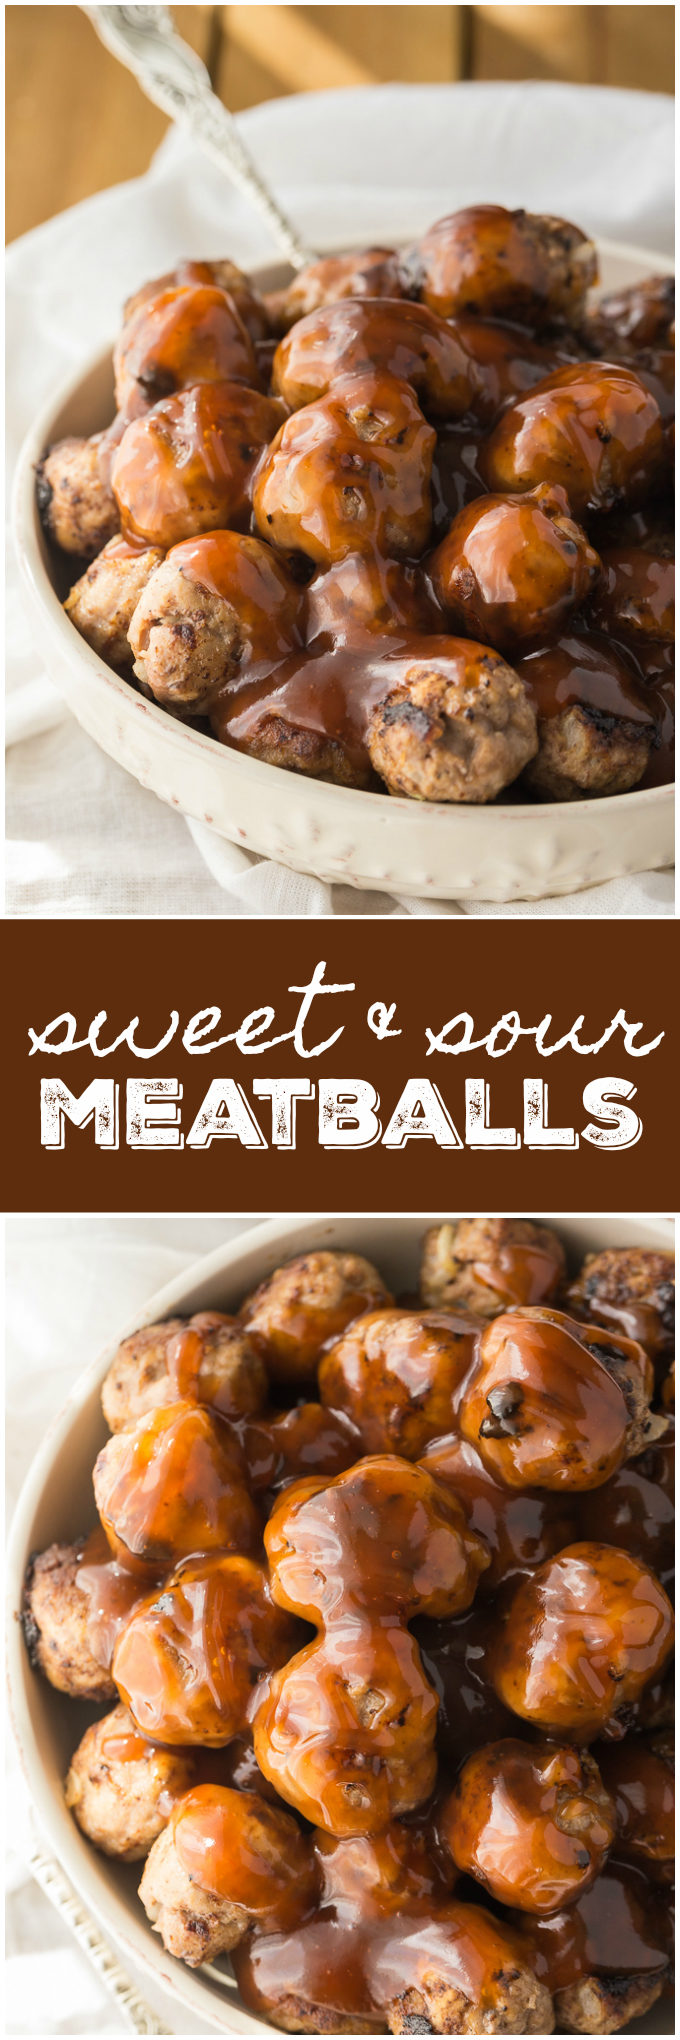 Sweet and Sour Meatballs - Your favorite Chinese dish becomes a crowd-pleasing appetizer. These easy meatballs are smothered in a sweet and tangy sauce and ready in 30 minutes.